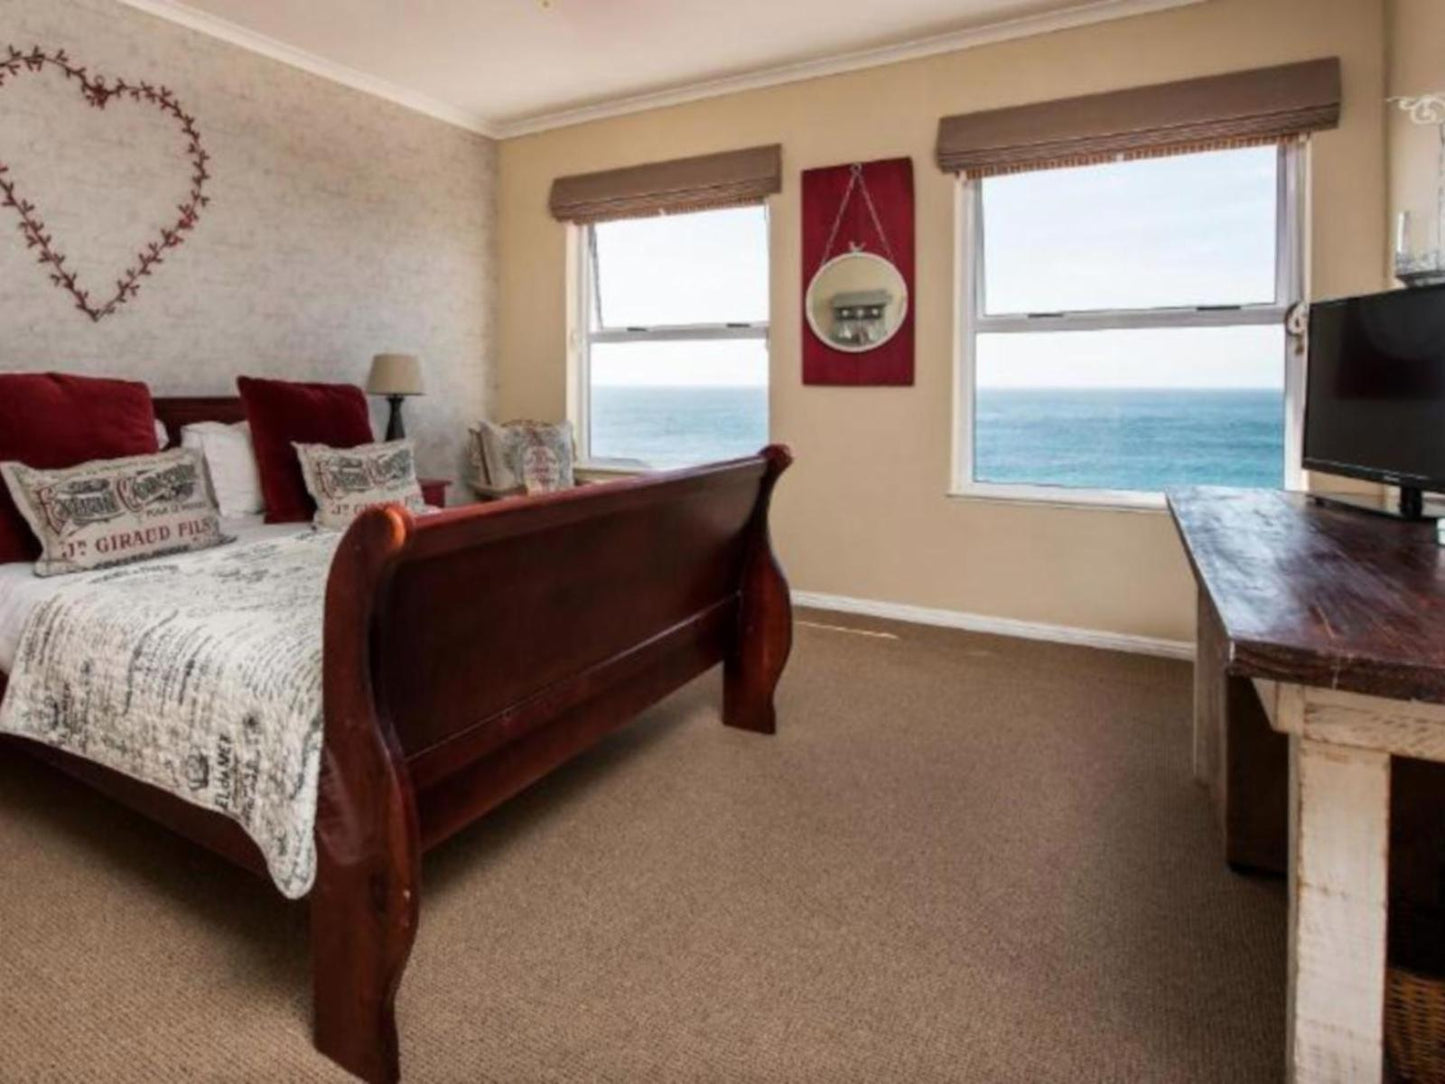 Sea facing Double Room @ Whale View Manor Boutique Hotel And Spa